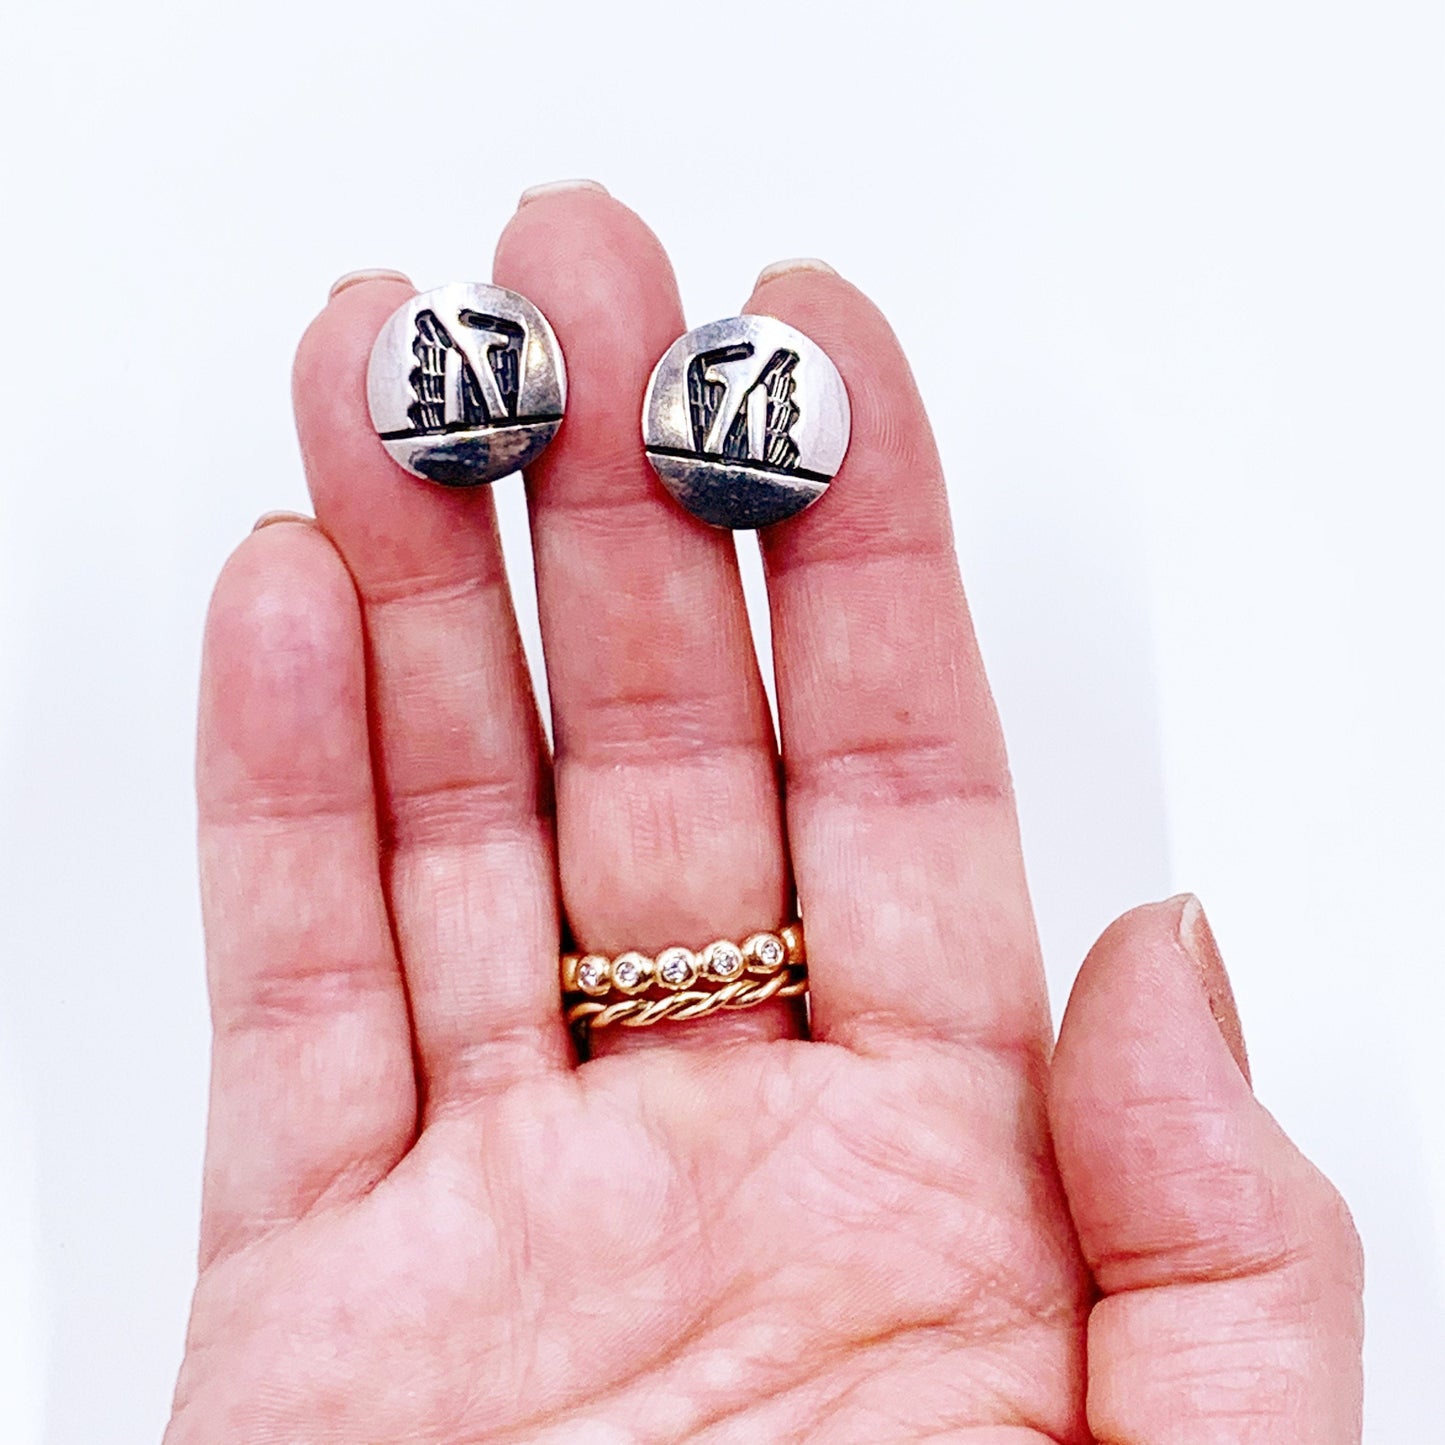 Vintage Silver Abstract Overlay Earrings | Midcentury Abstract Earrings